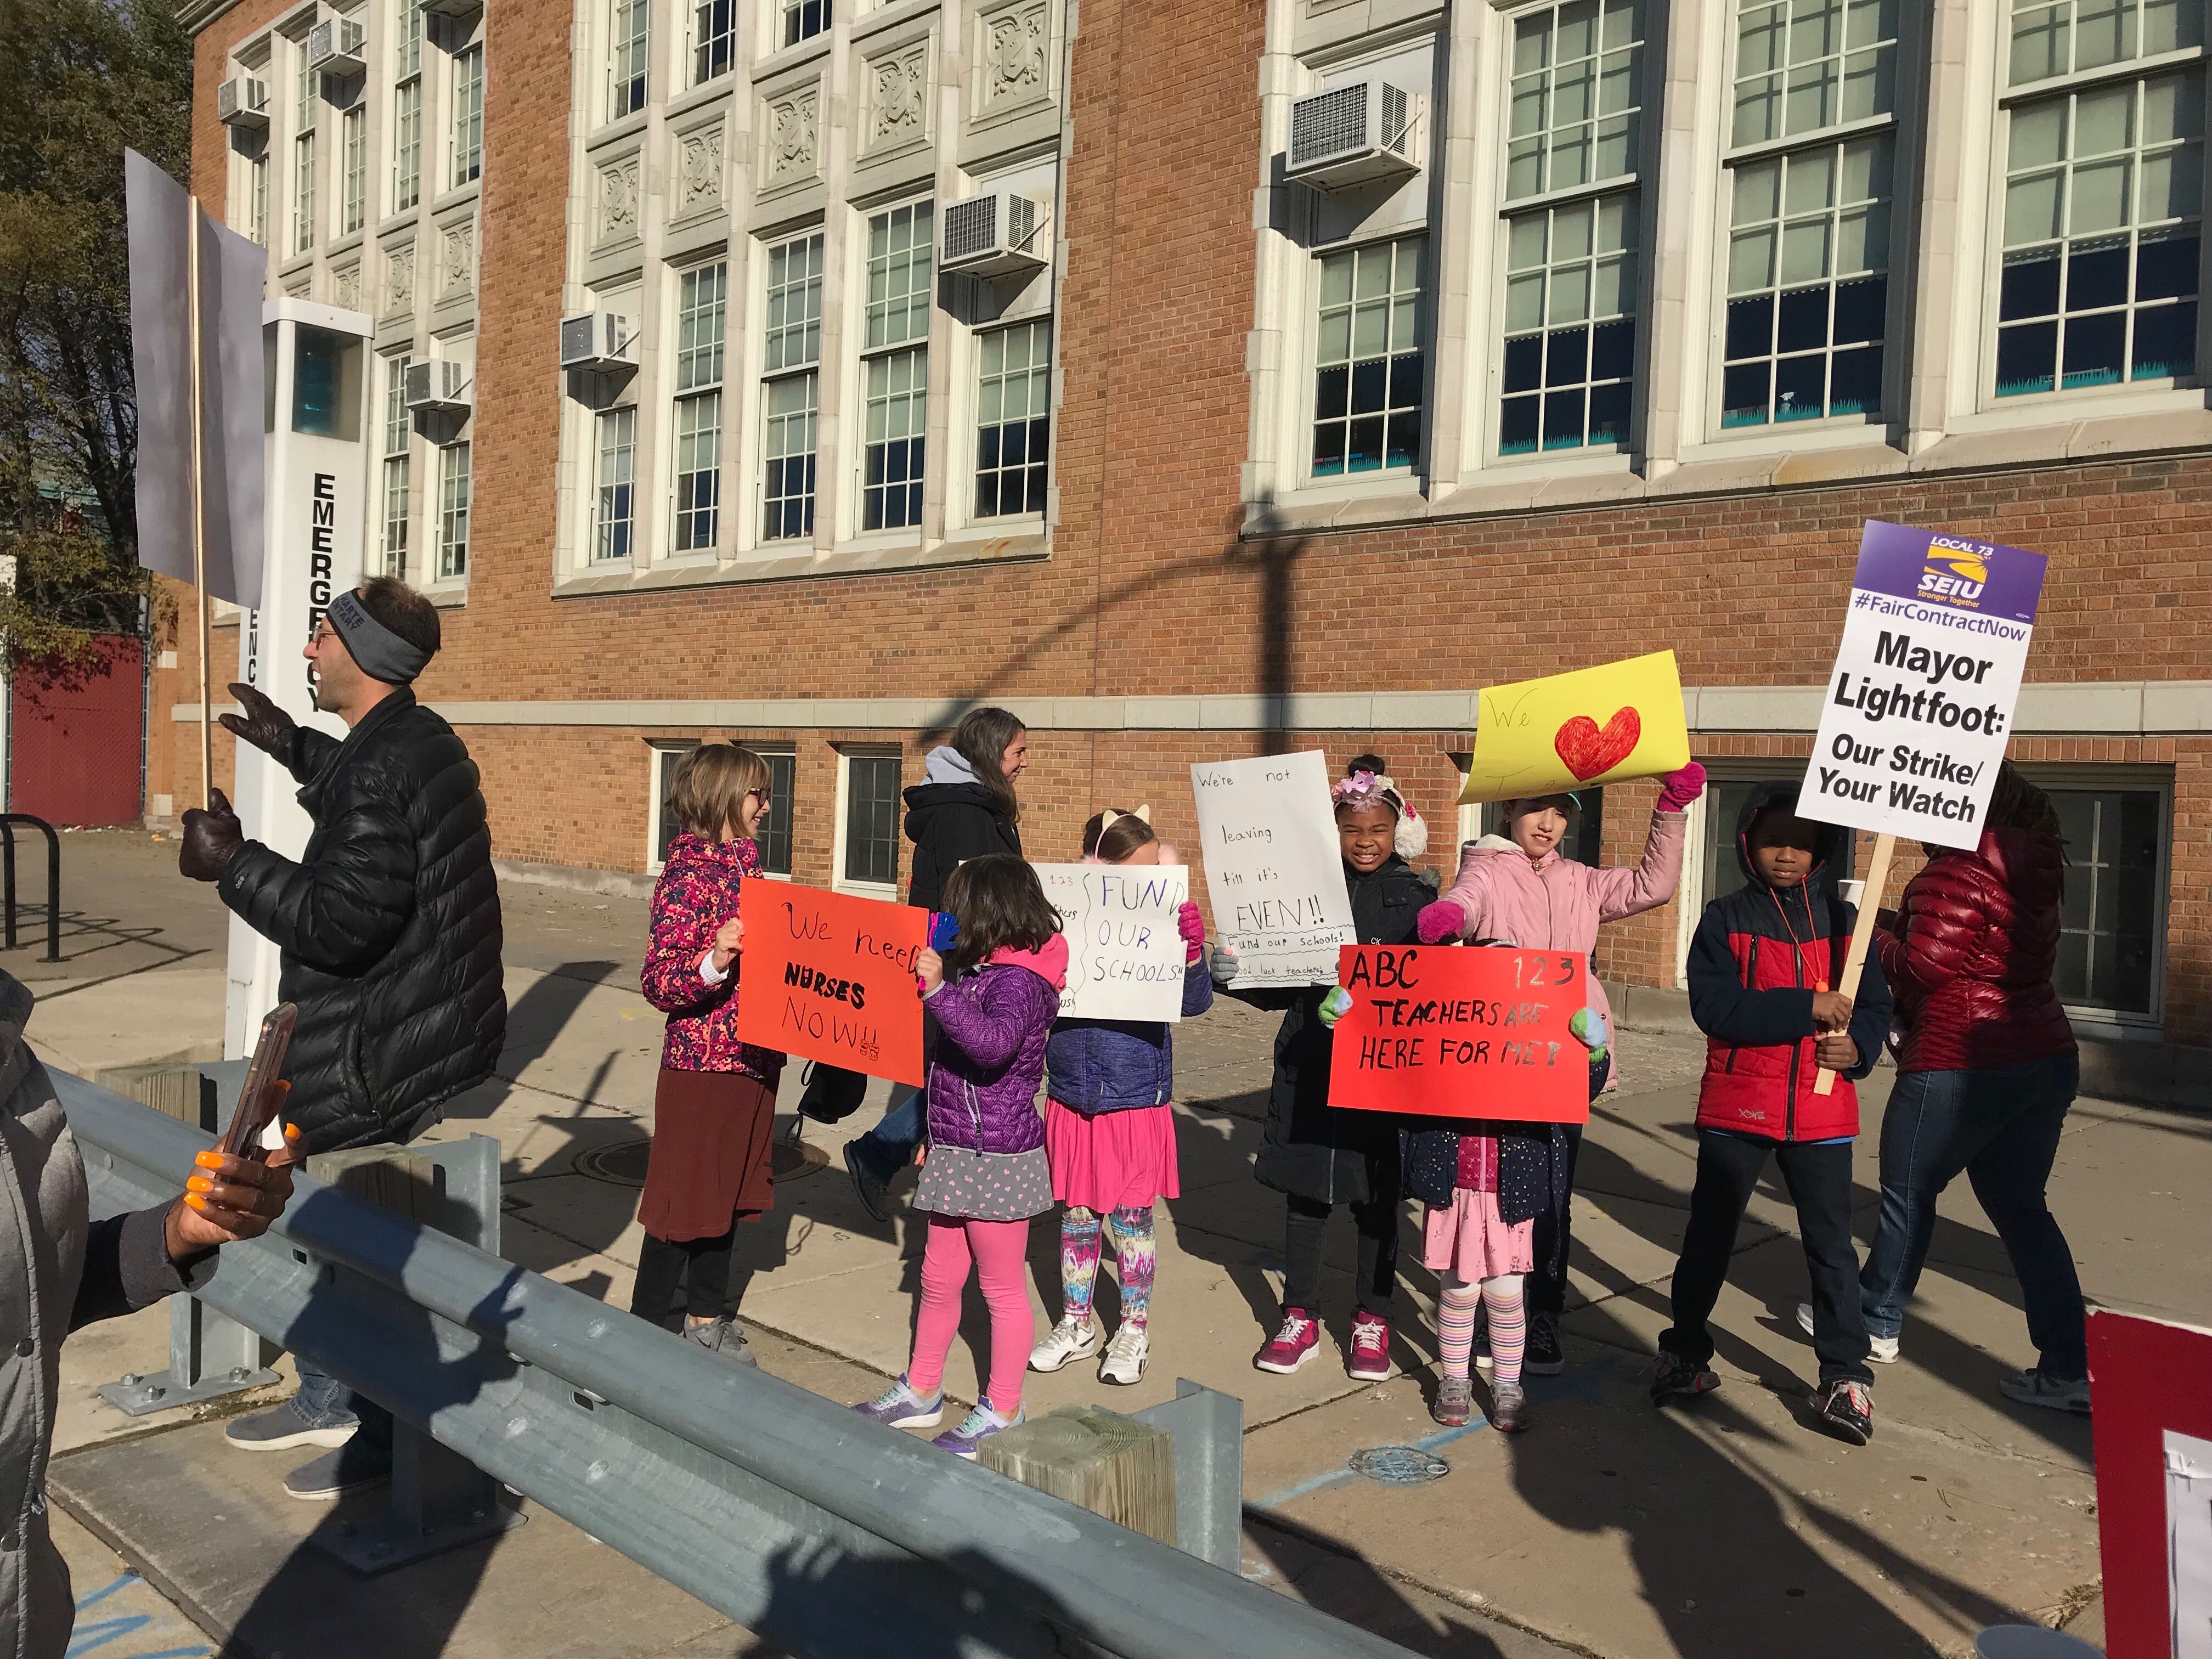 John Hieronymus and his two children joined the picket line at Bret Harte Elementary in Hyde Park on Oct. 17, 2019.